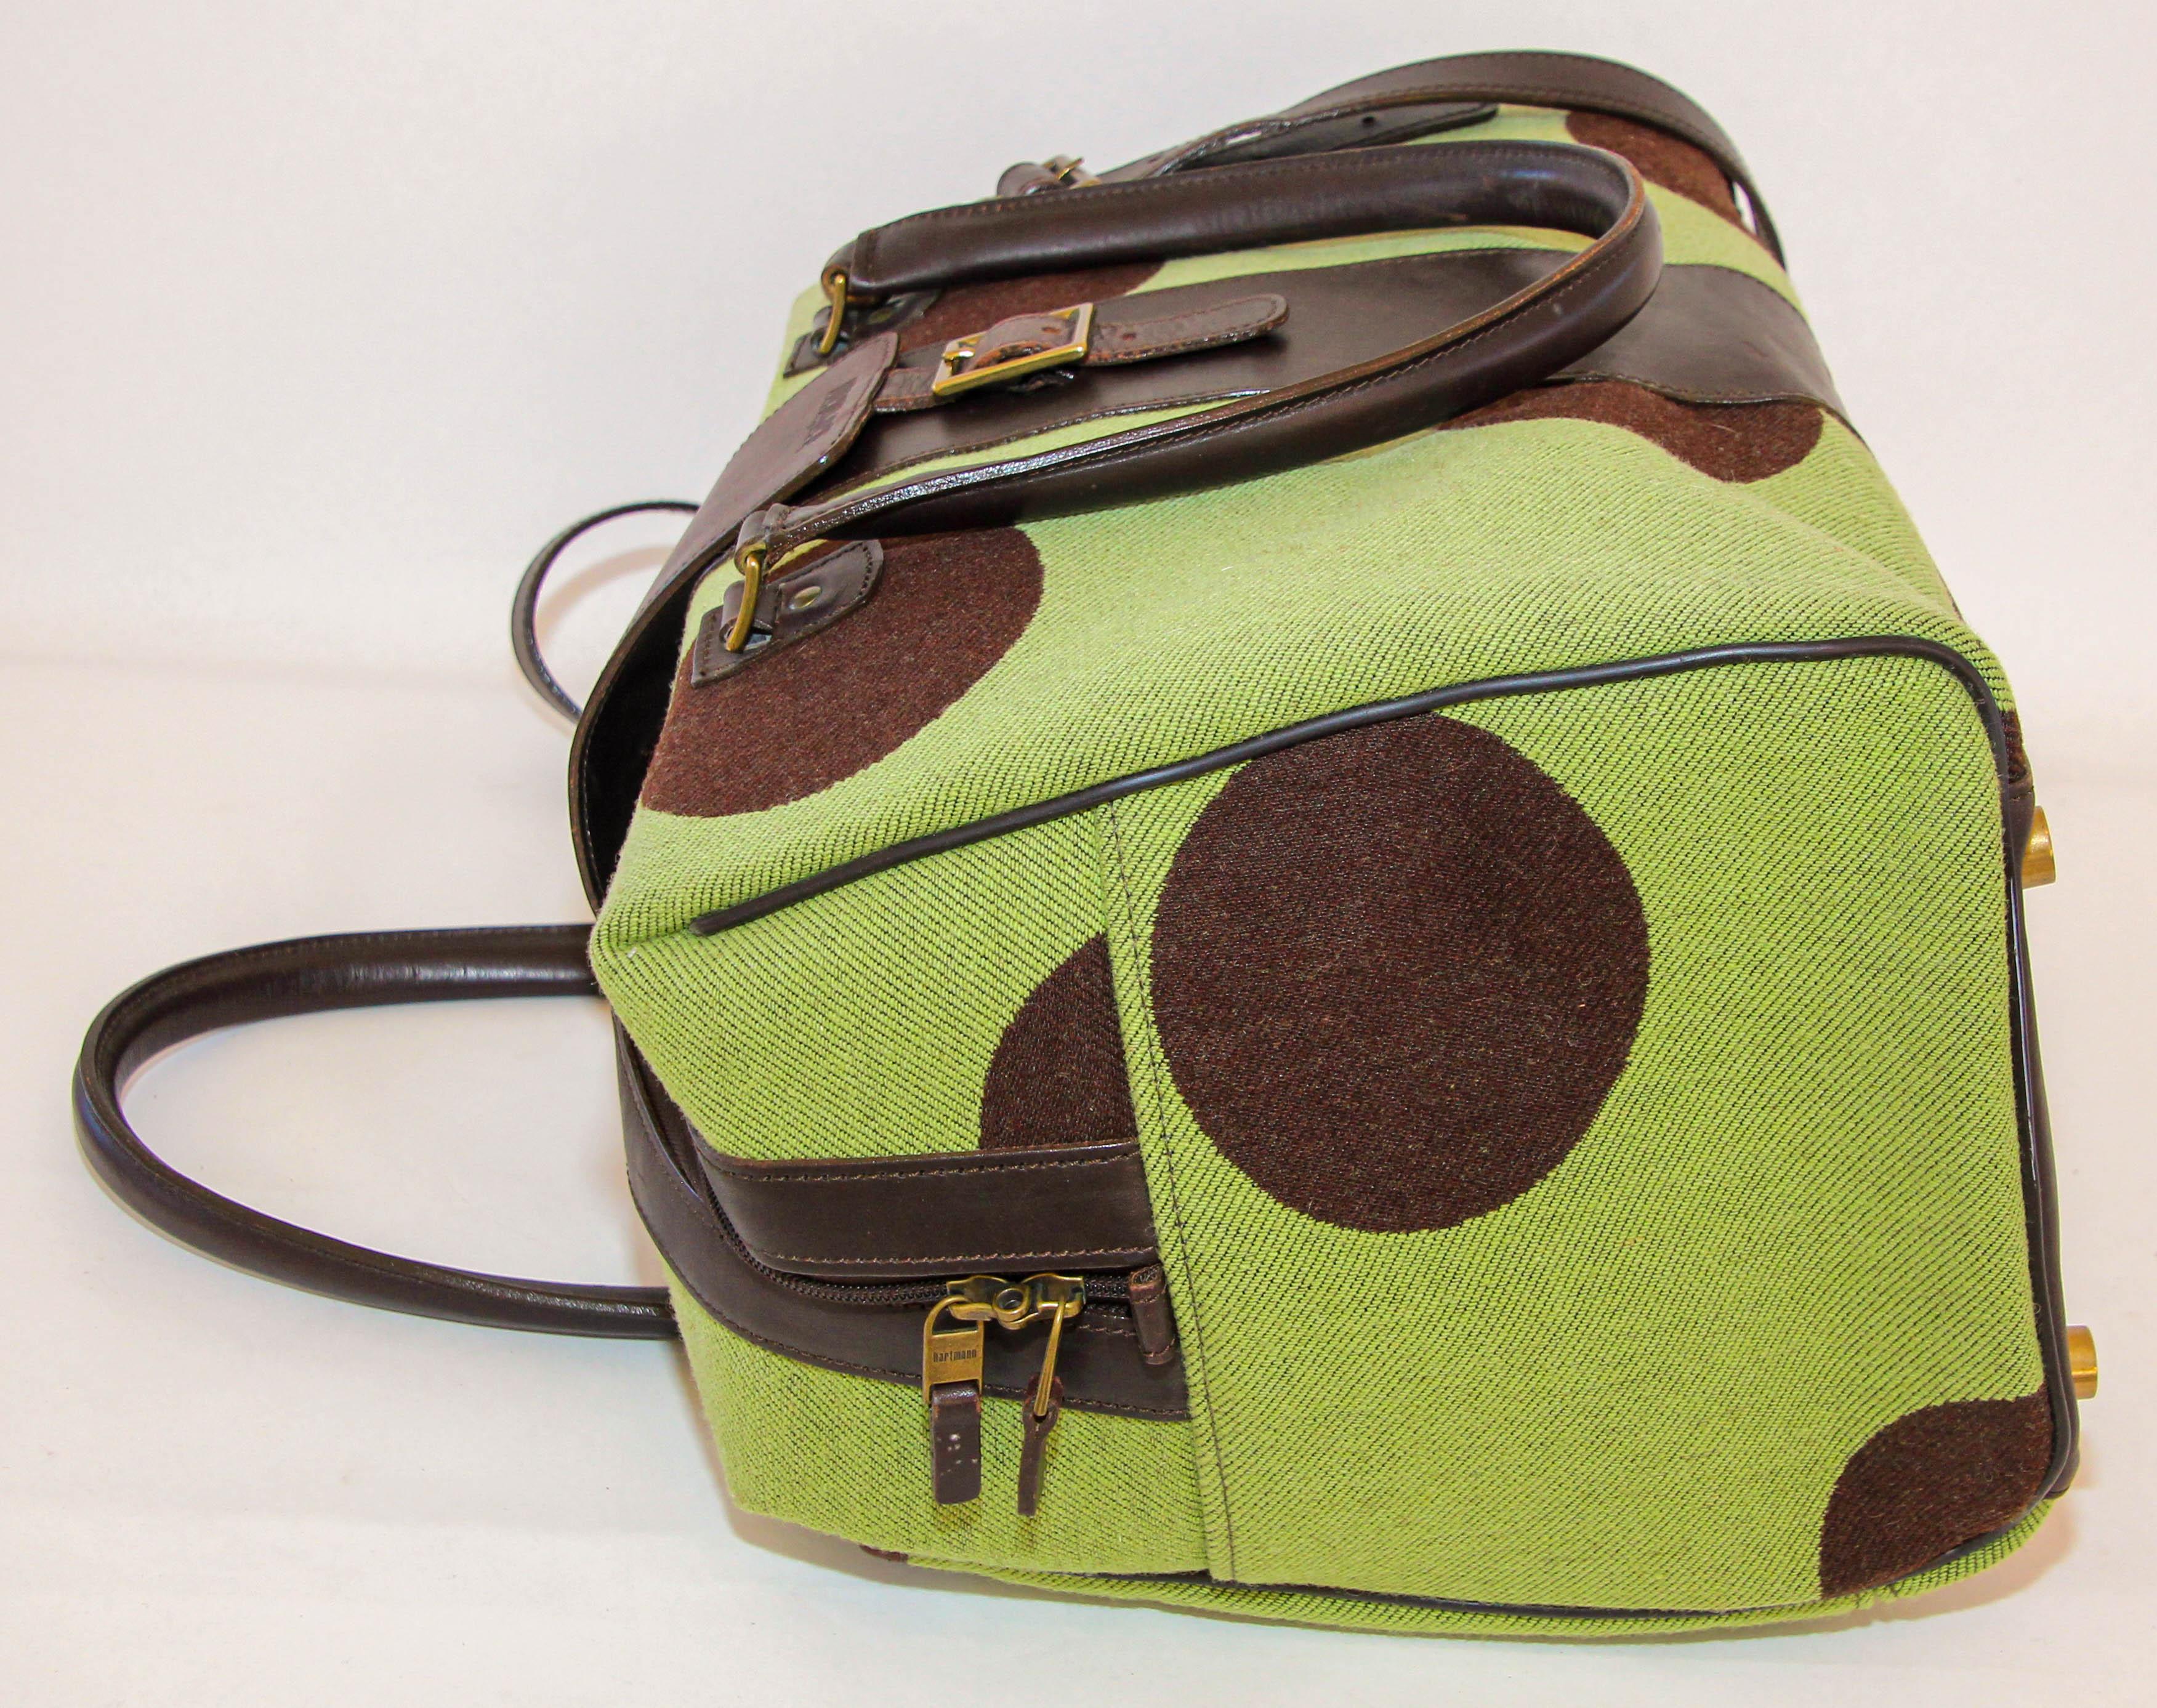 Hartmann Retro Carry-On in Apple Green with Polka Dot For Sale 2